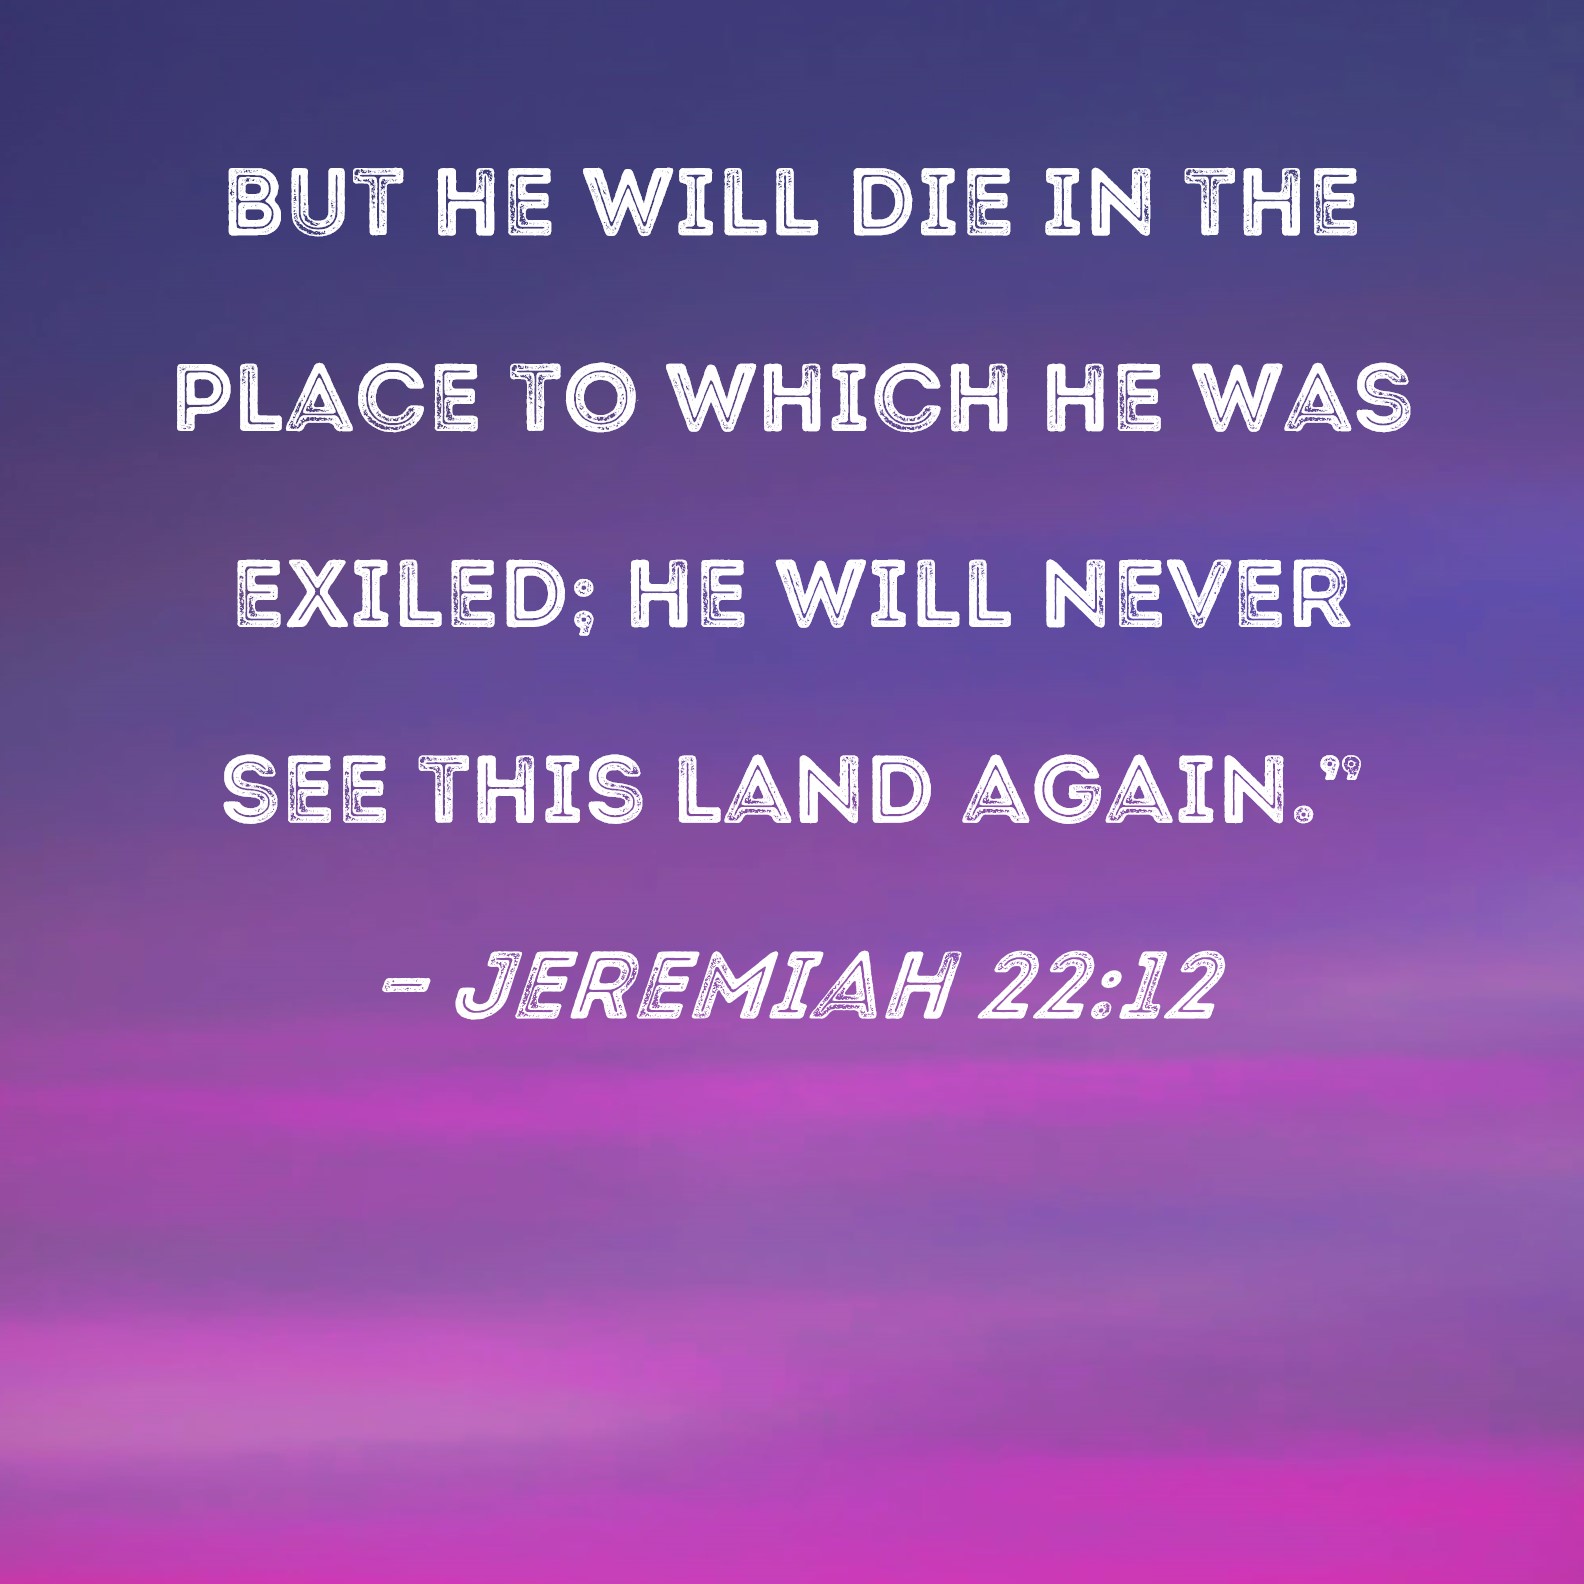 Jeremiah 2212 but he will die in the place to which he was exiled; he